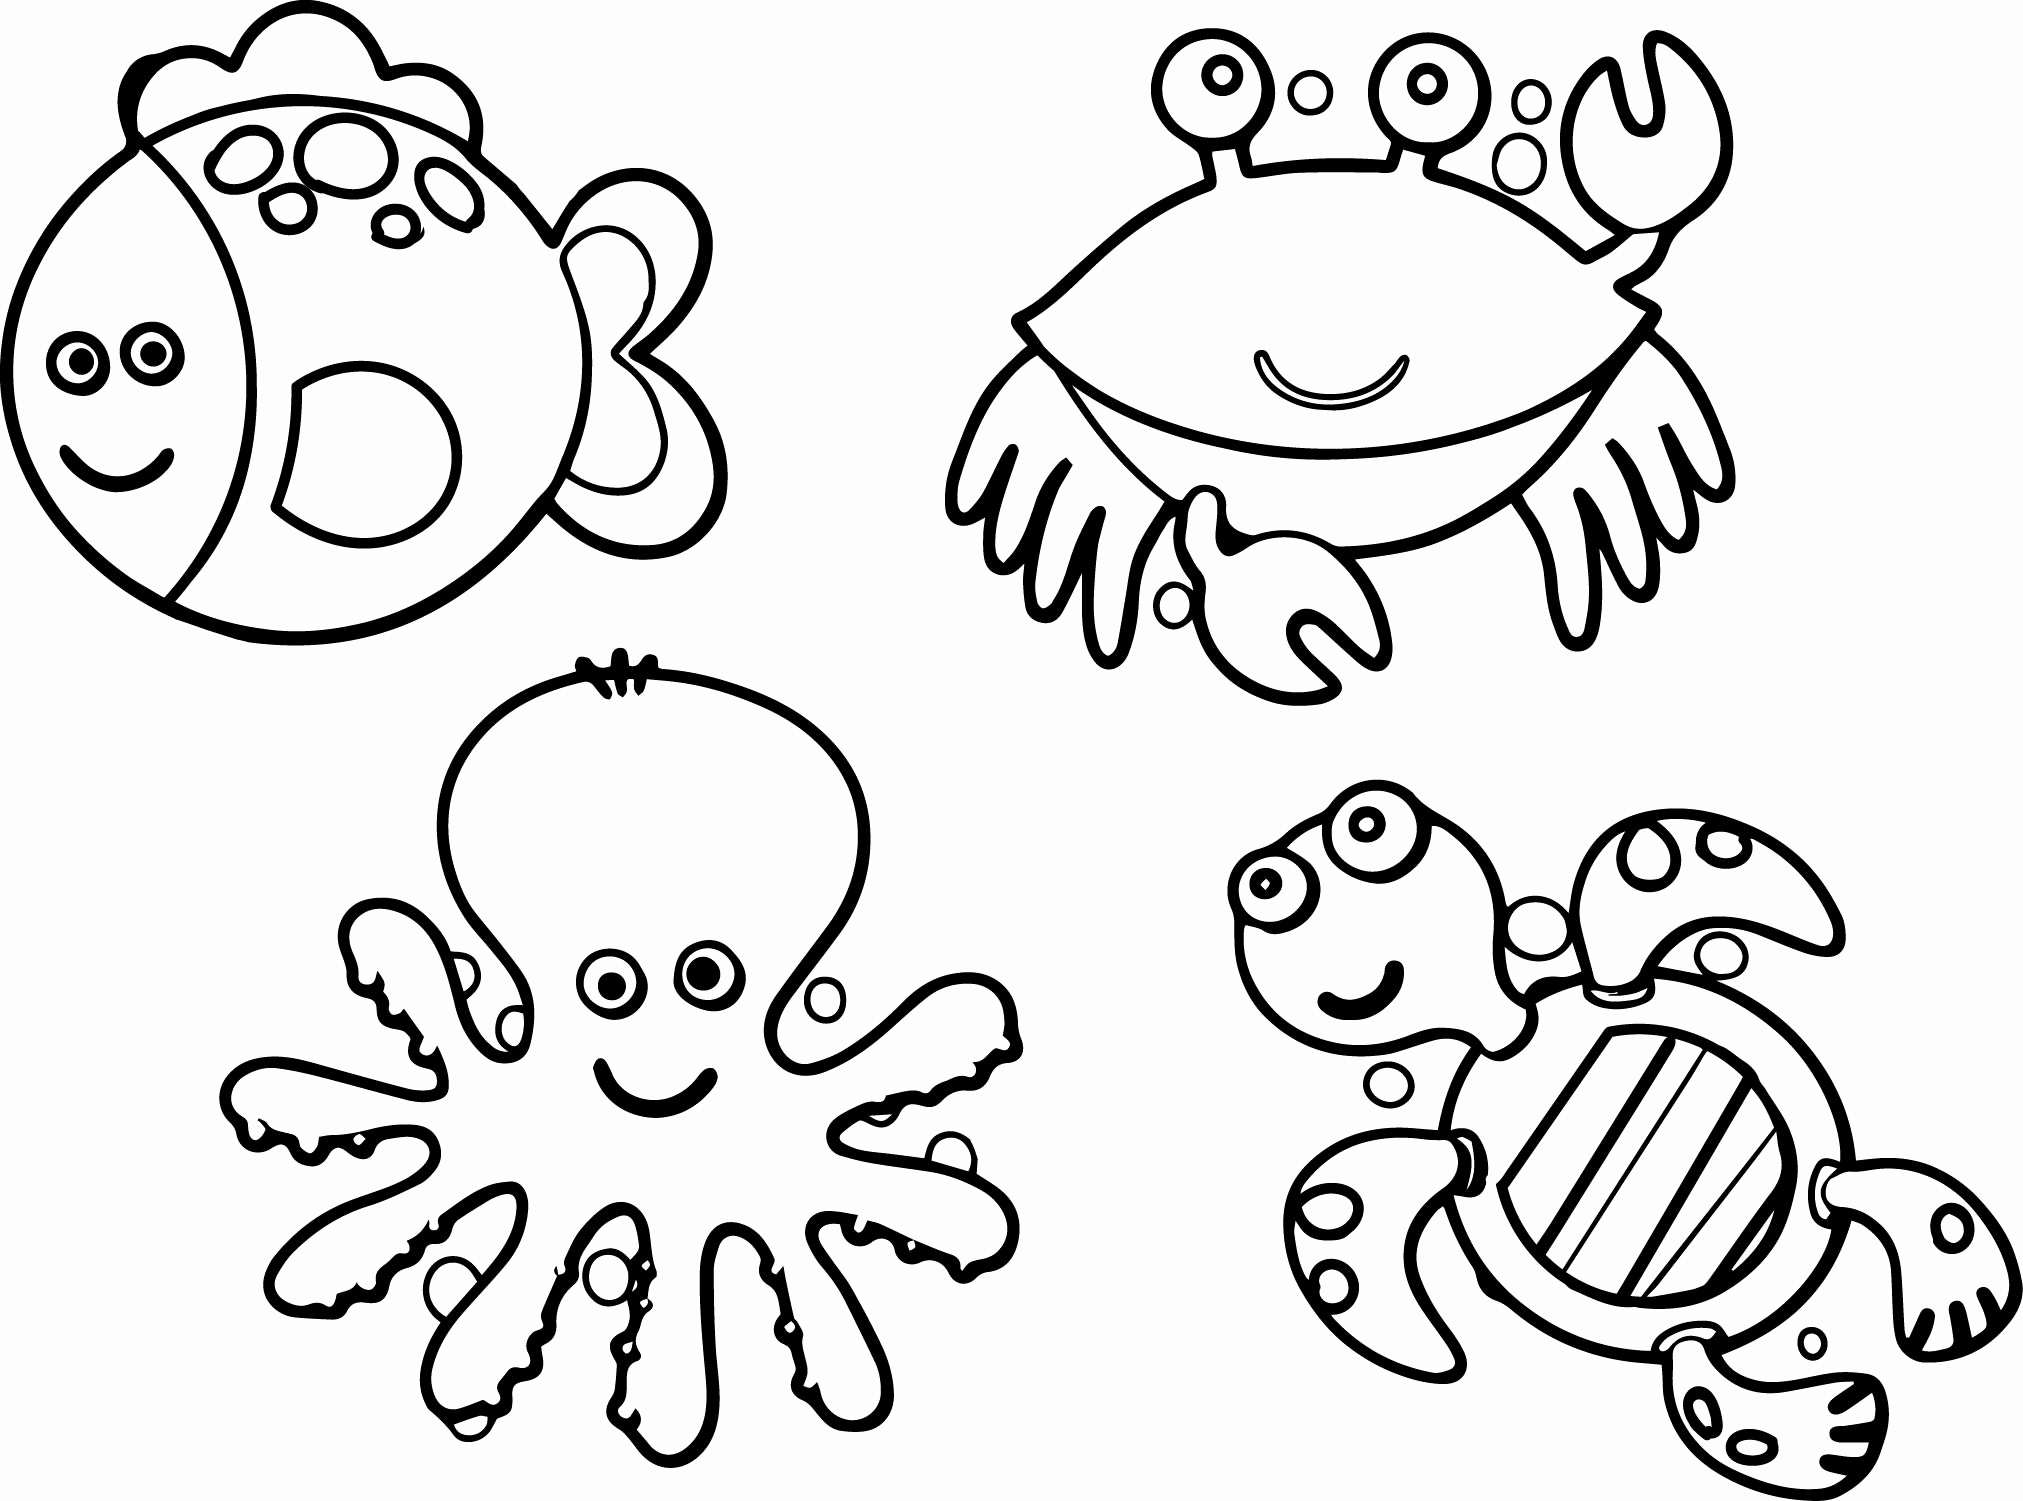 printable-animal-coloring-pages-etsy